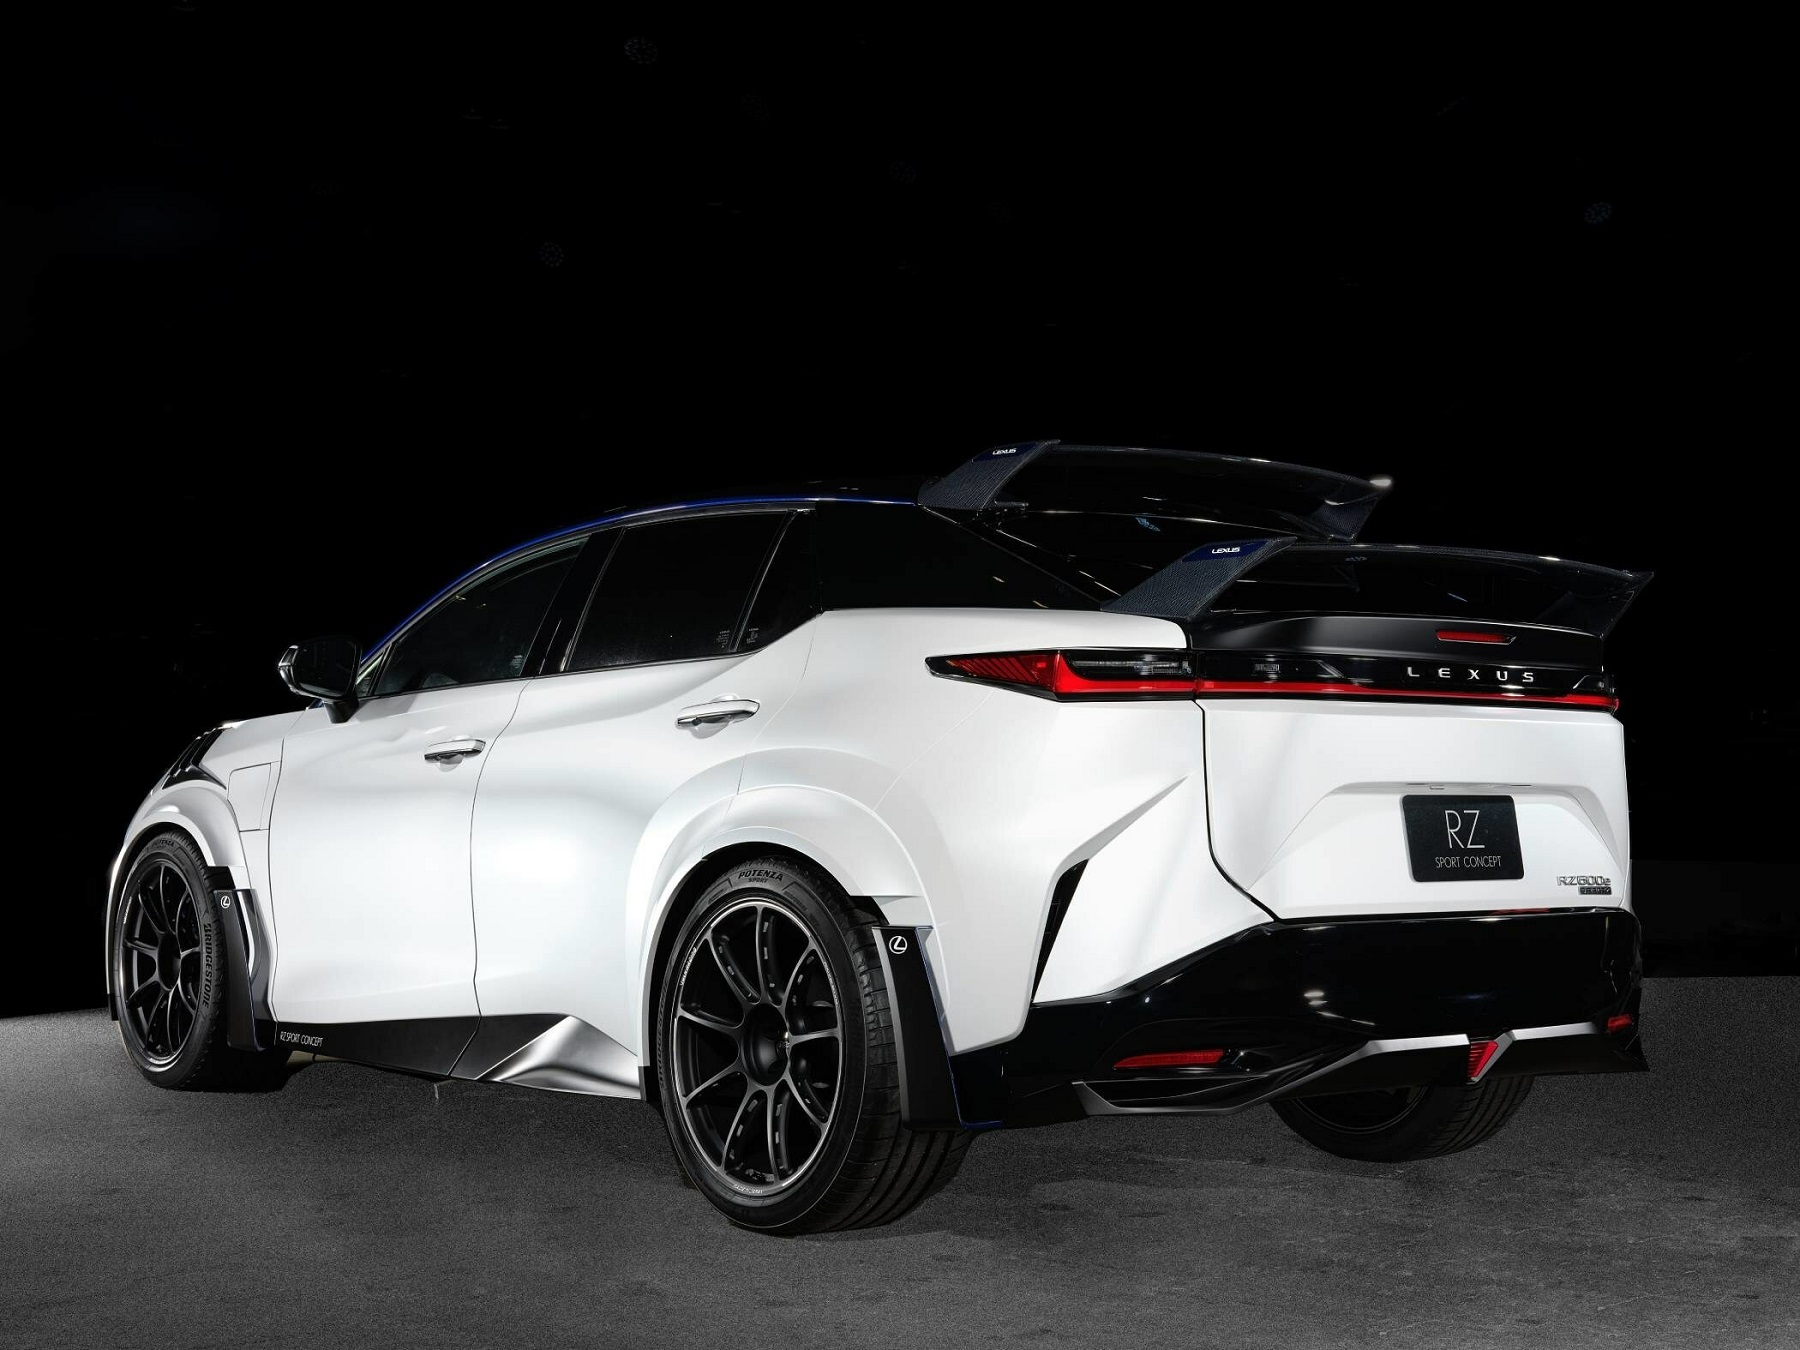 LEXUS ARRIVES TO MONTEREY CAR WEEK 2023 WITH ITS LATEST IN BOLD DESIGNS AND PERFORMANCE